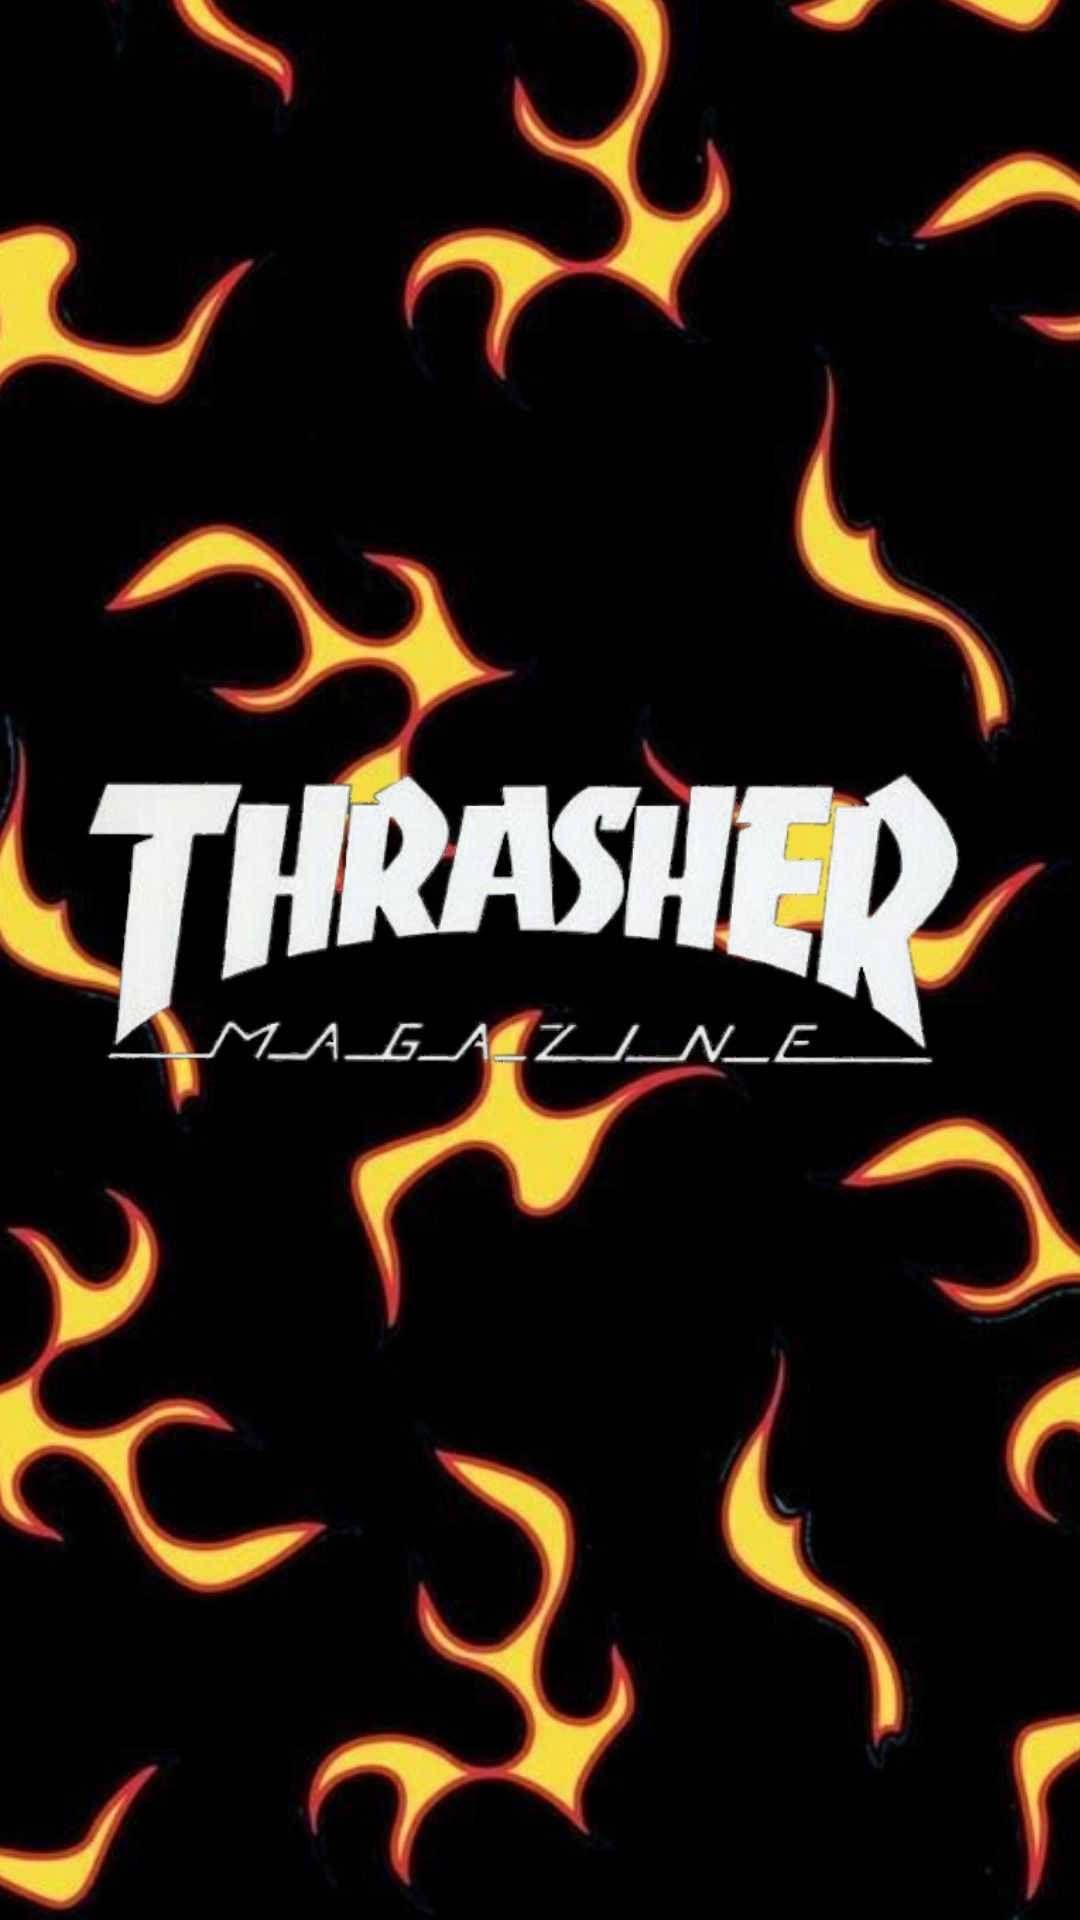 Download Thrasher With Flame Patterns Wallpaper